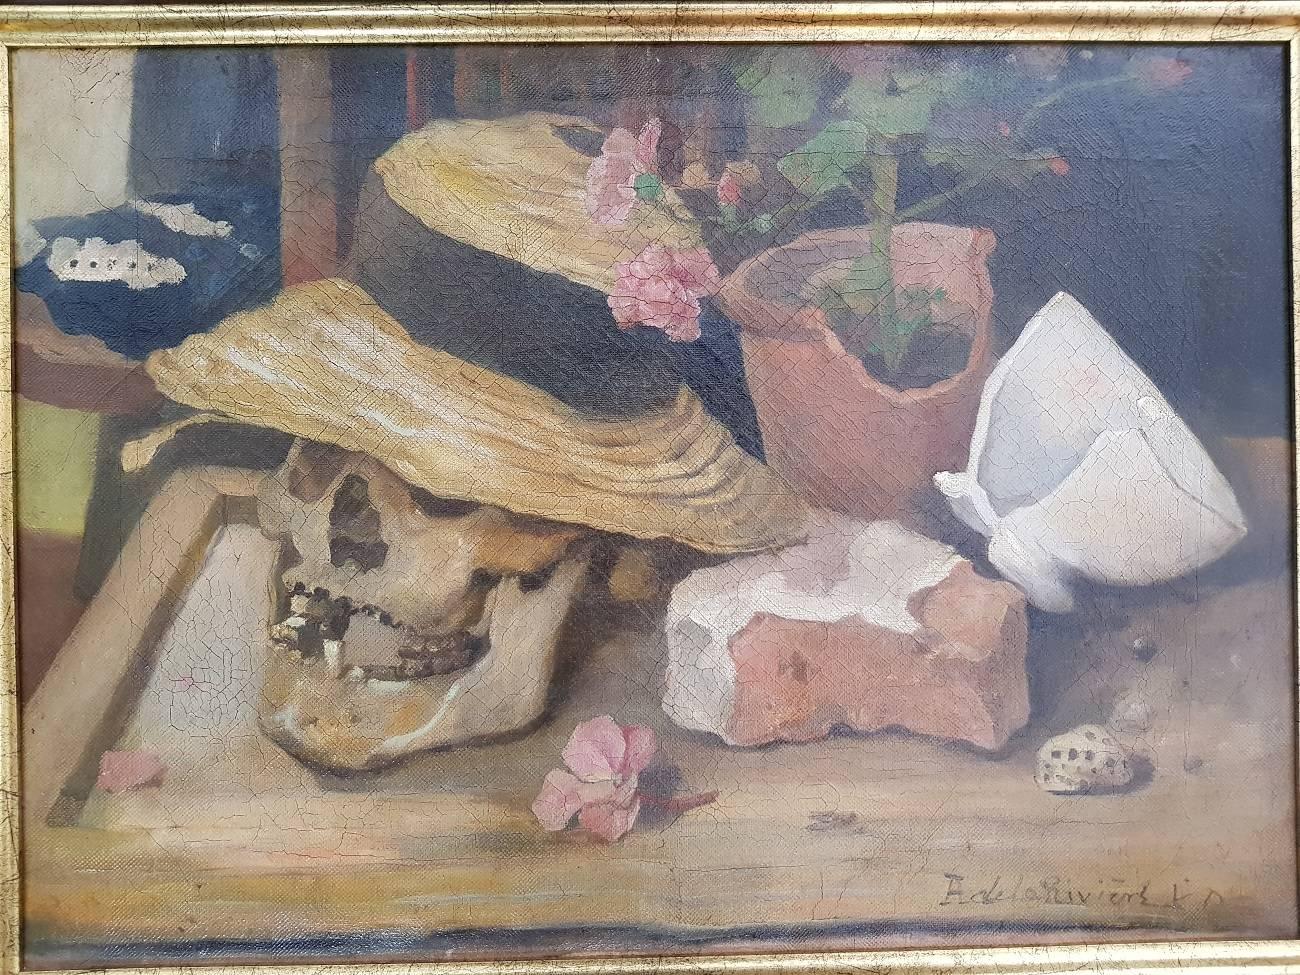 Vanitas genre painting on canvas and signed lower right by Adriaan La Rivière (1857-1941). Presenting a skull with hat and flowers in a broken pot (painting has crackle).

The measurements are,
Depth 5.5 cm/ 2.1 inch.
Width 67 cm/ 26.3